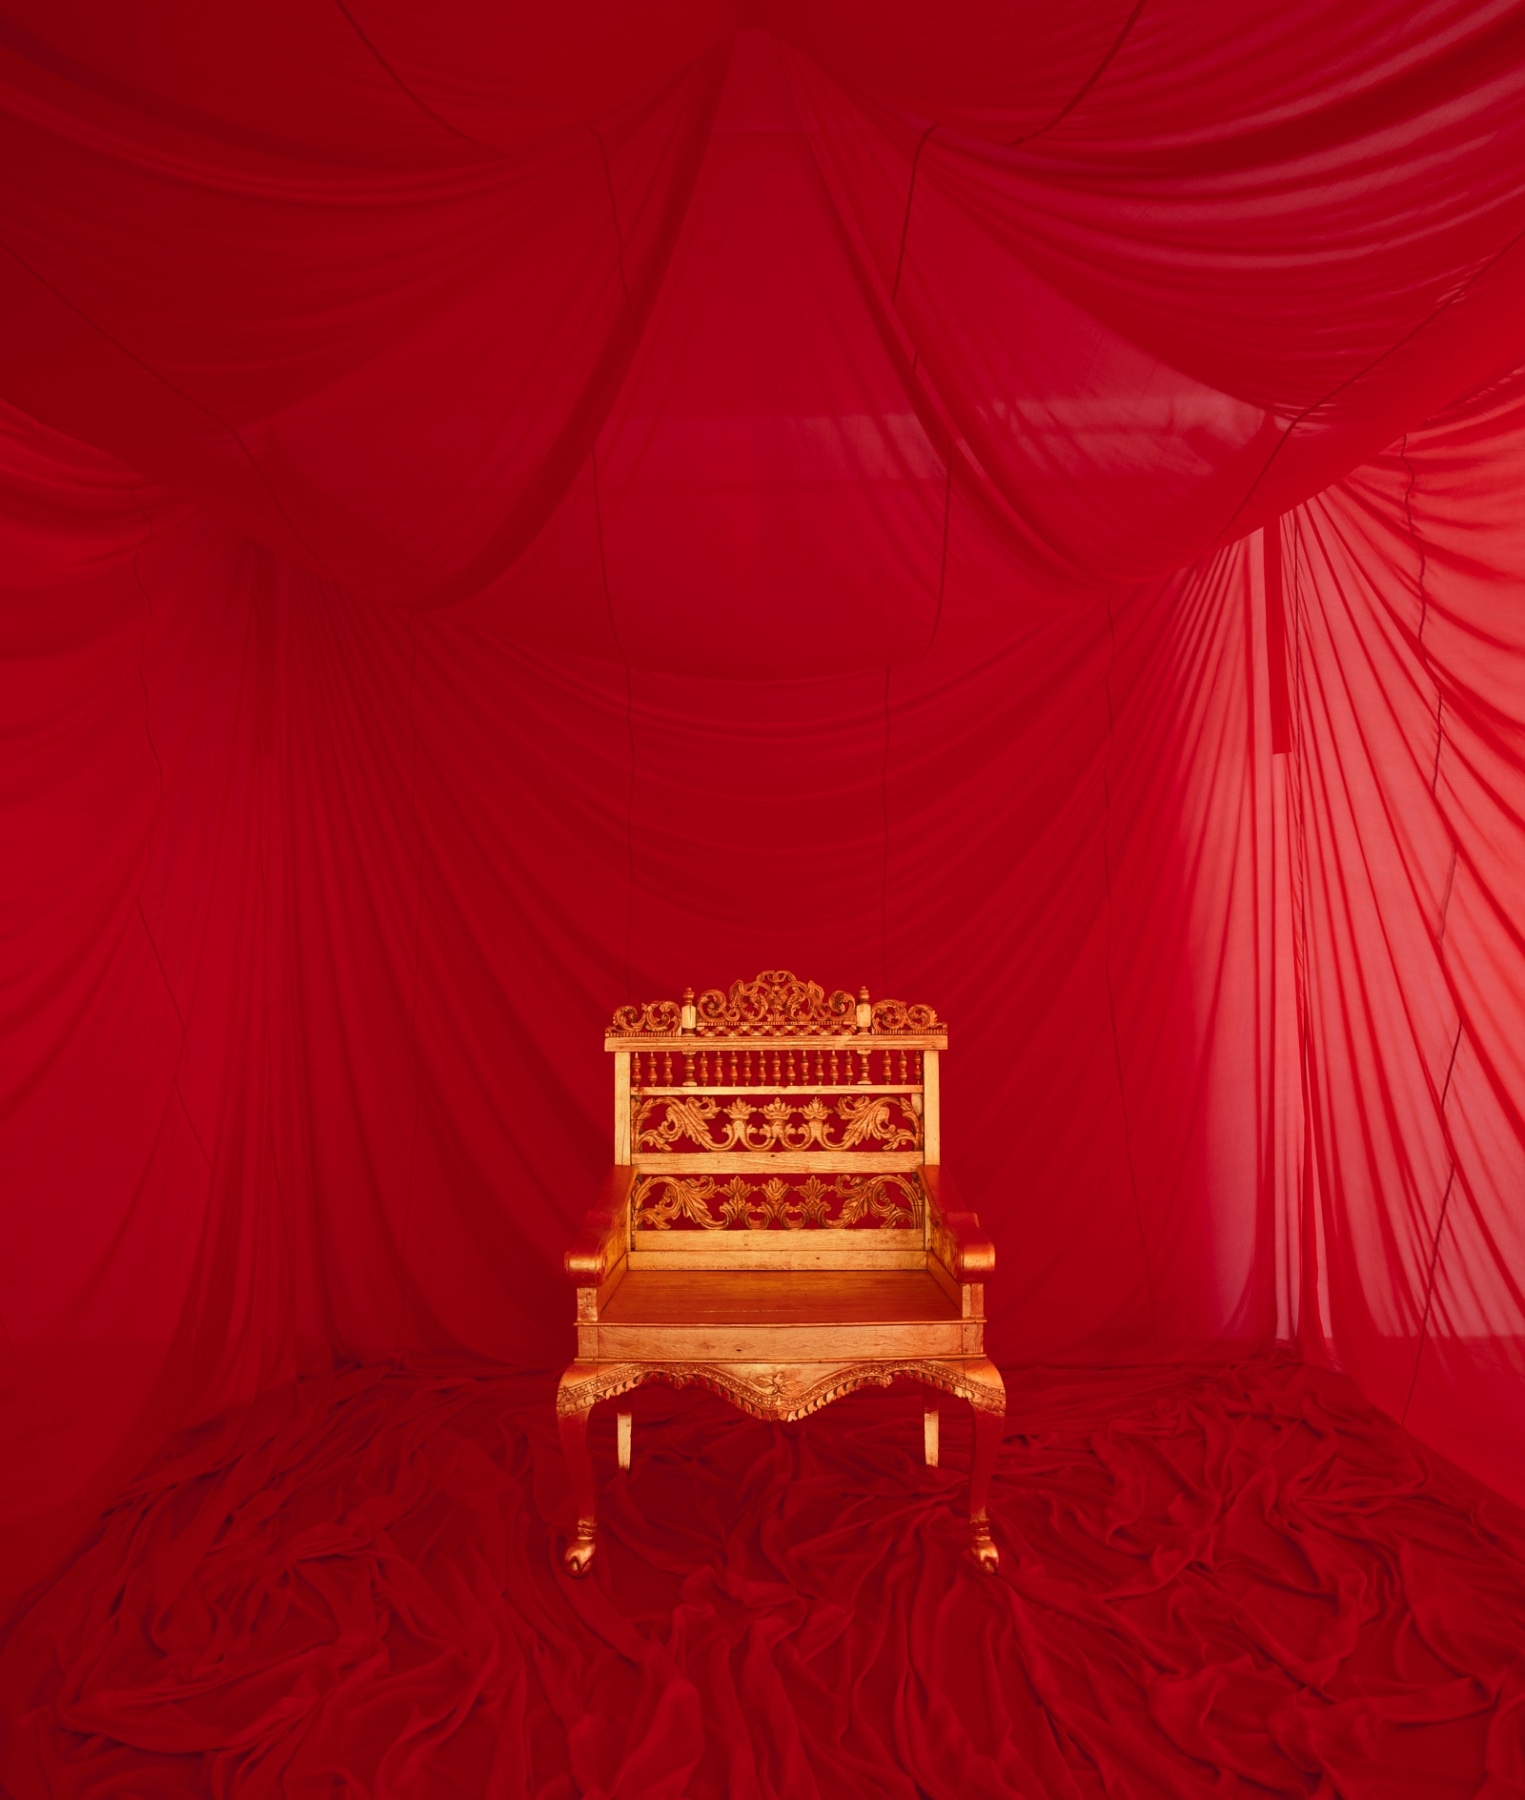 James Lee Byars: The Perfect Moment - Red Brick Art Museum, Beijing - Viewing Room - Michael Werner Gallery, New York and London